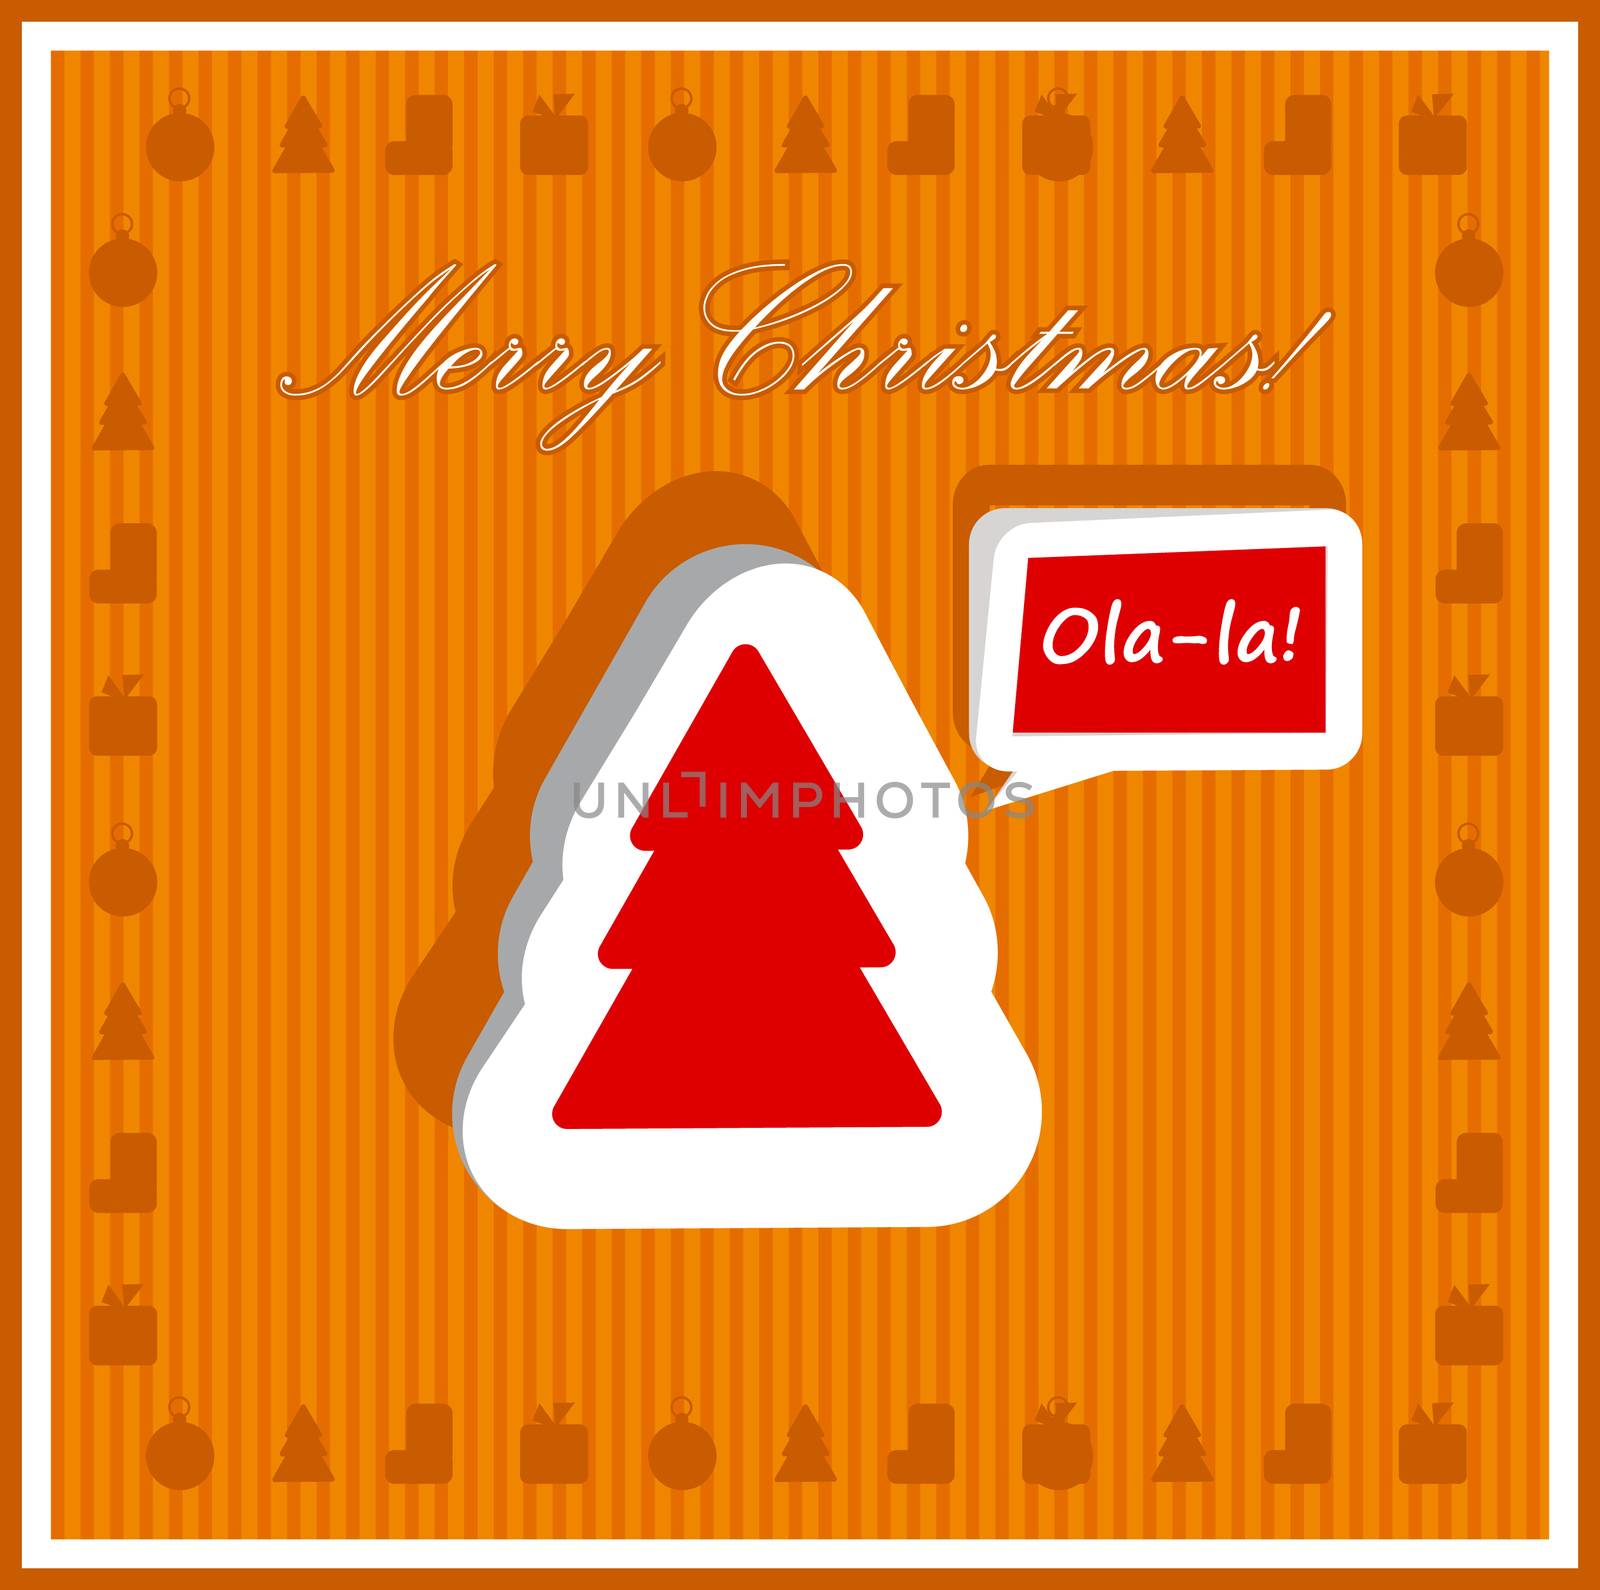 Merry Xmas Eve Talking Ola-la!Retro paper card poster background by tamaravector